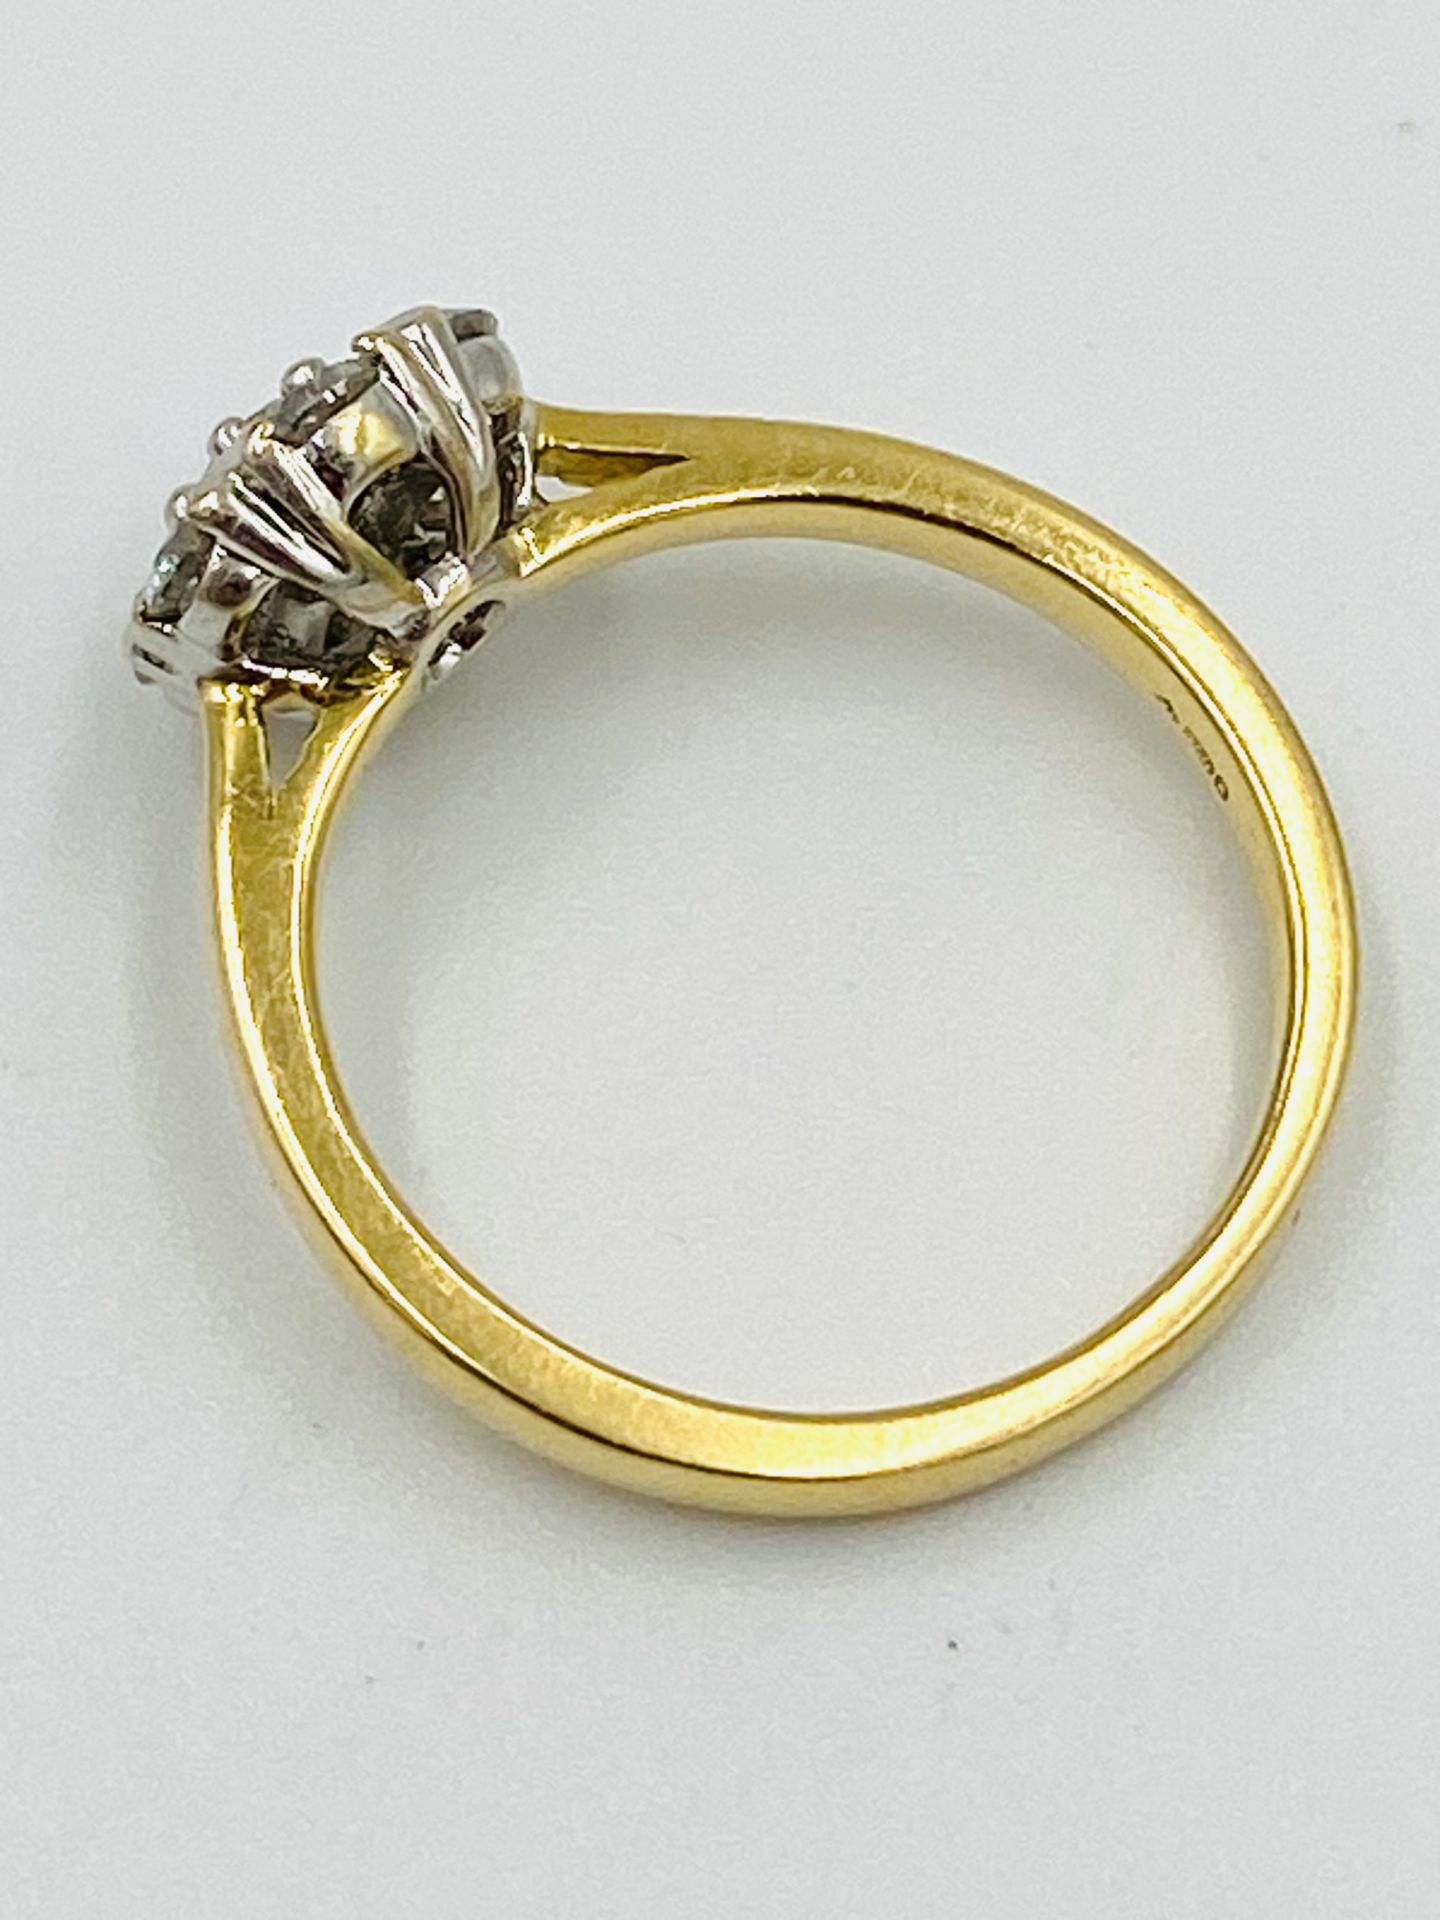 18ct gold and diamond cluster ring set with seven diamonds - Image 2 of 4